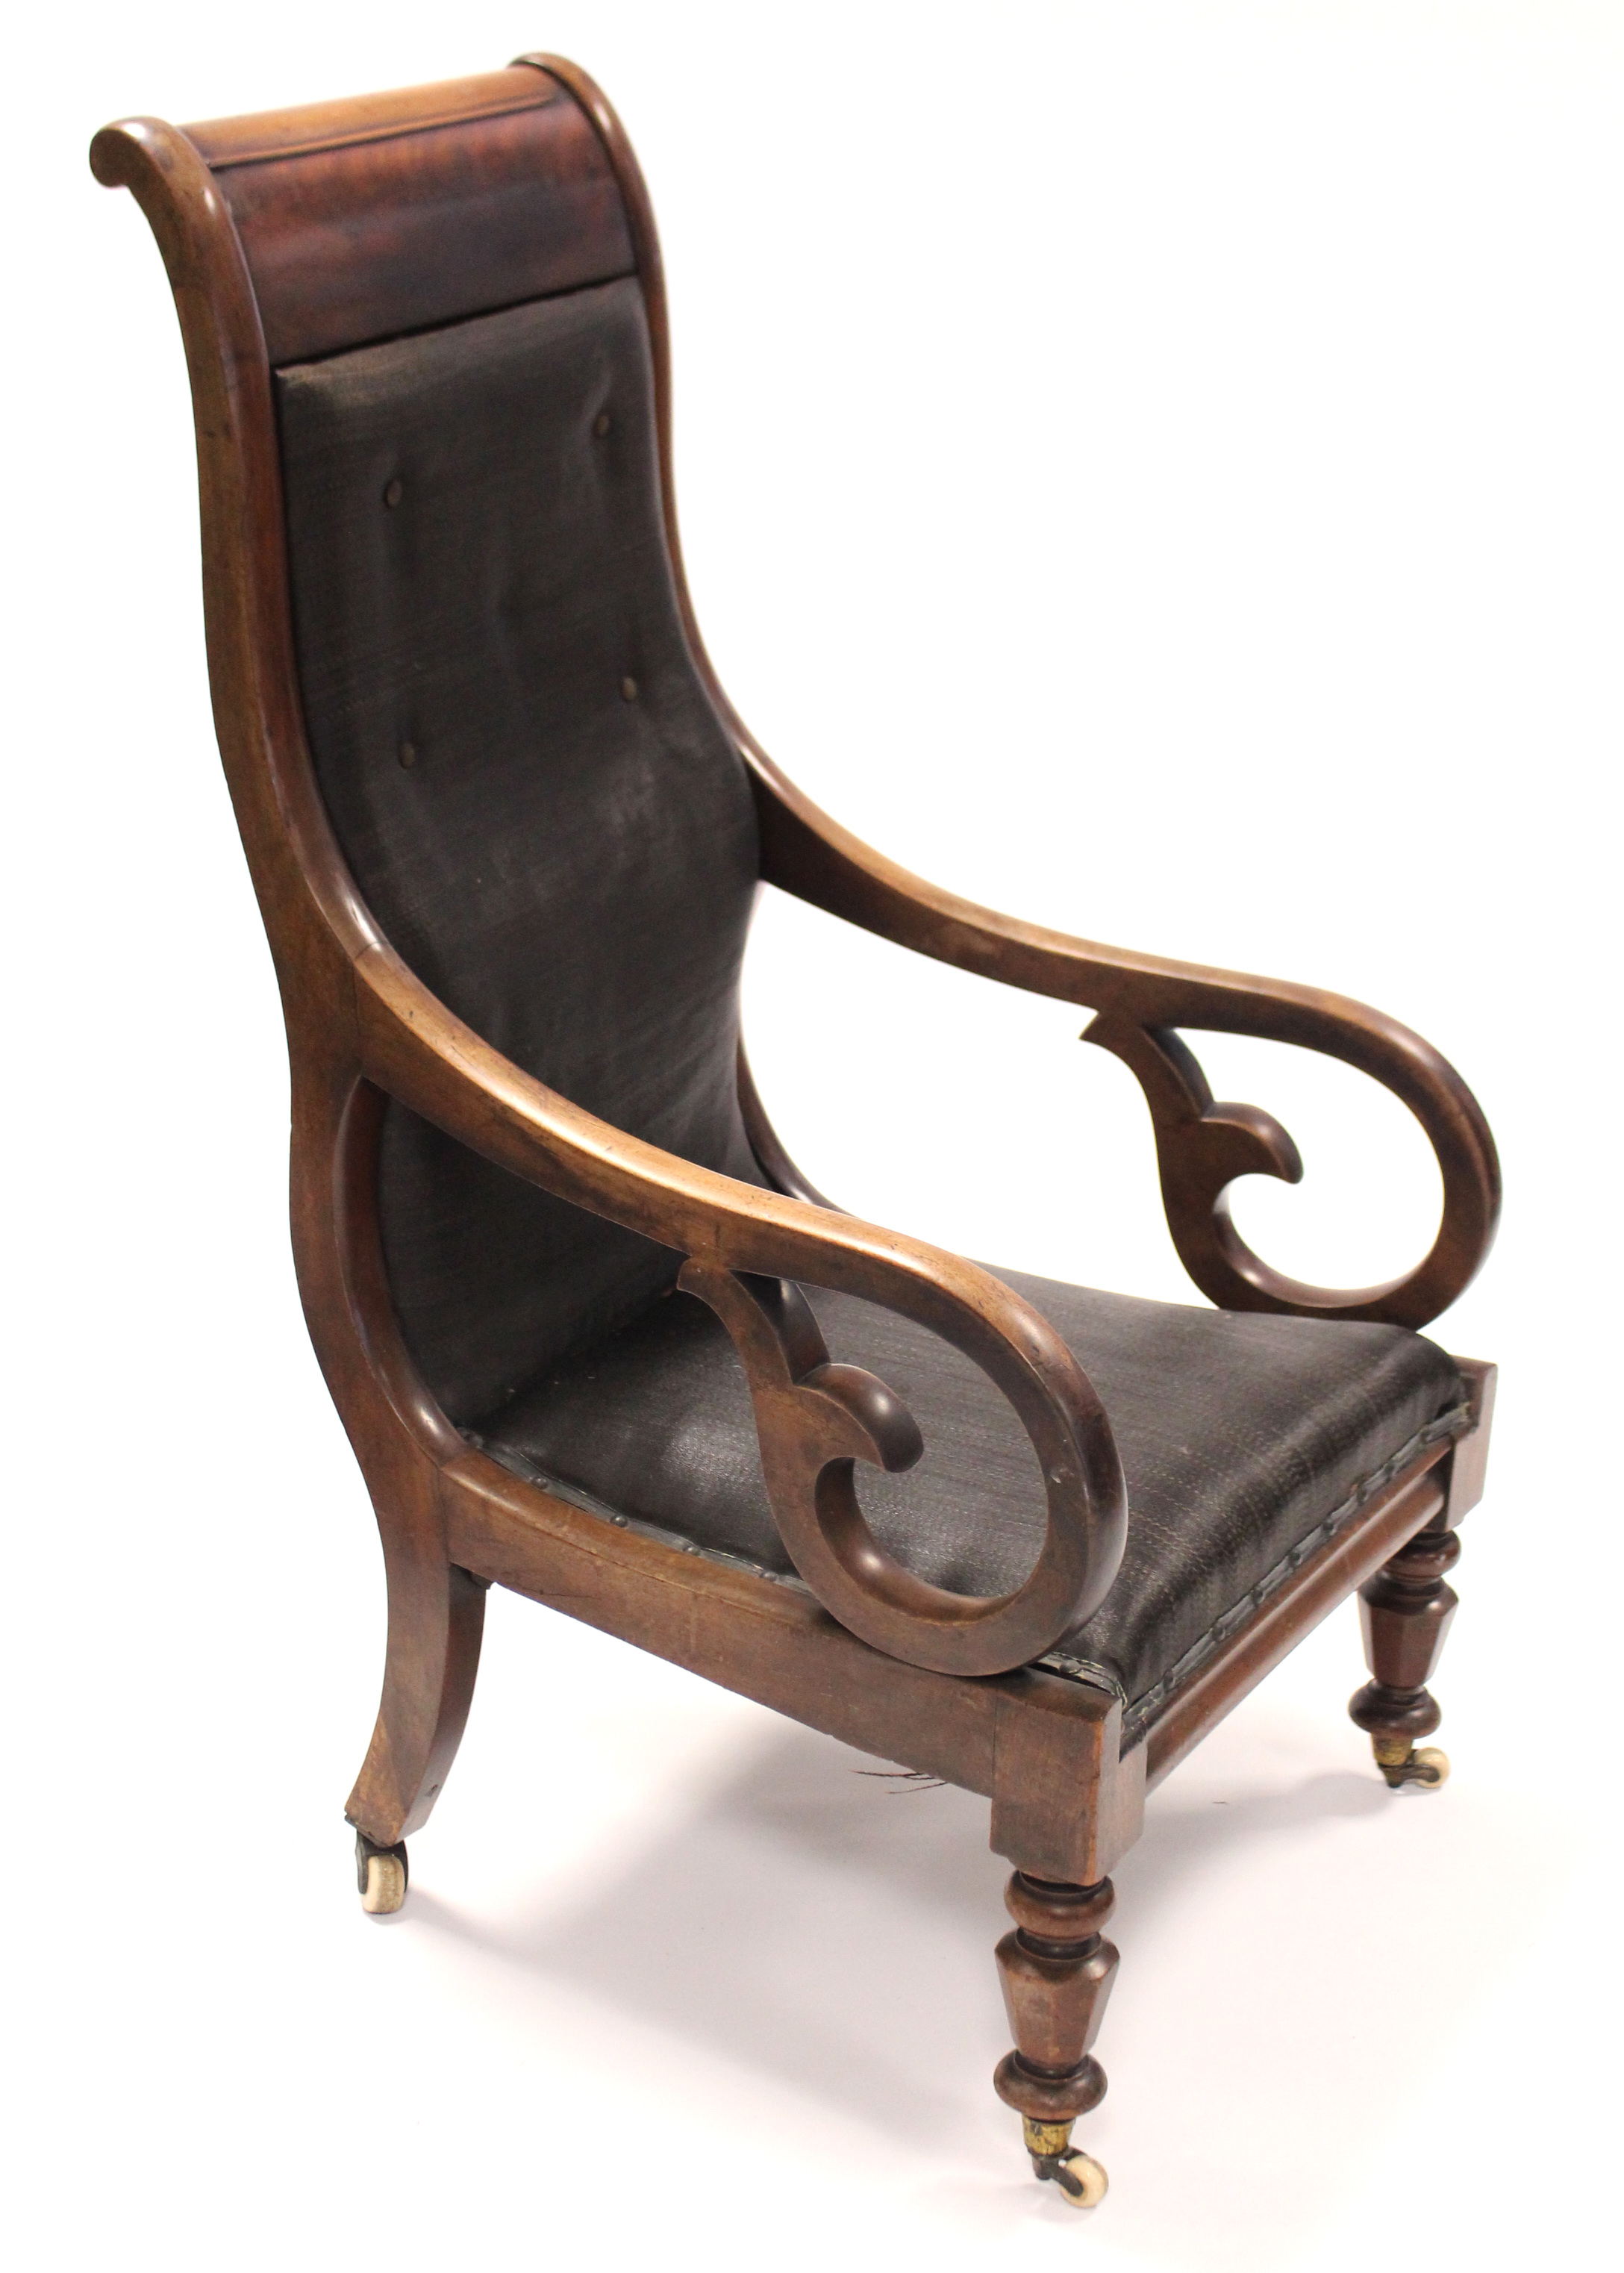 A William IV mahogany library armchair, with open scroll arms, padded seat & tall buttoned-back - Image 4 of 4